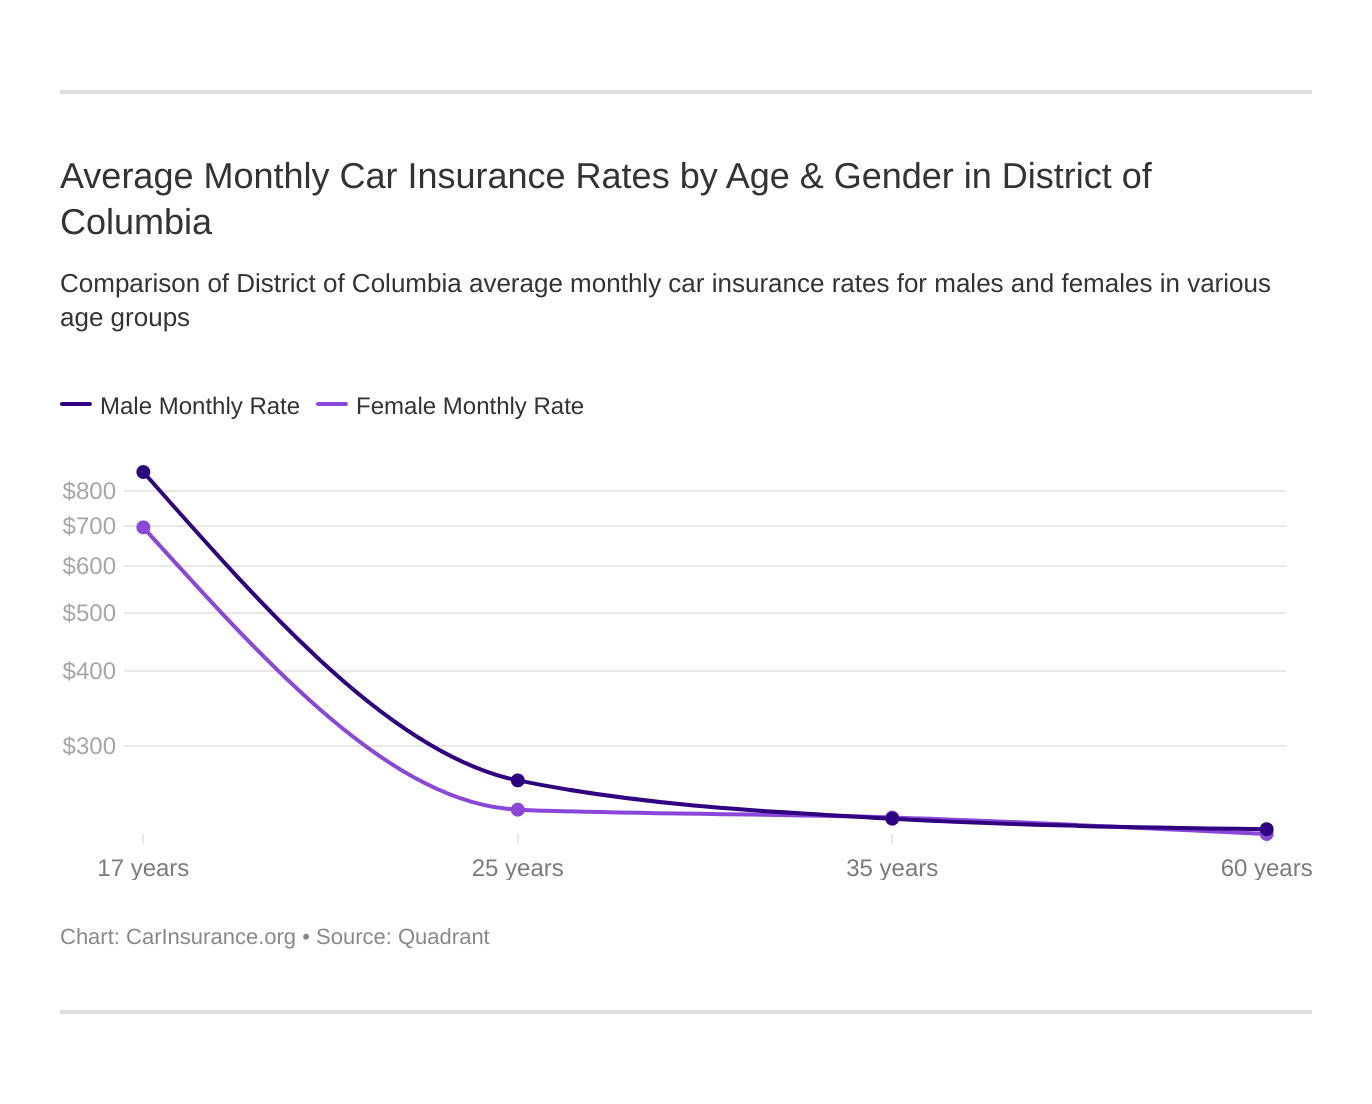 Average Monthly Car Insurance Rates by Age & Gender in District of Columbia